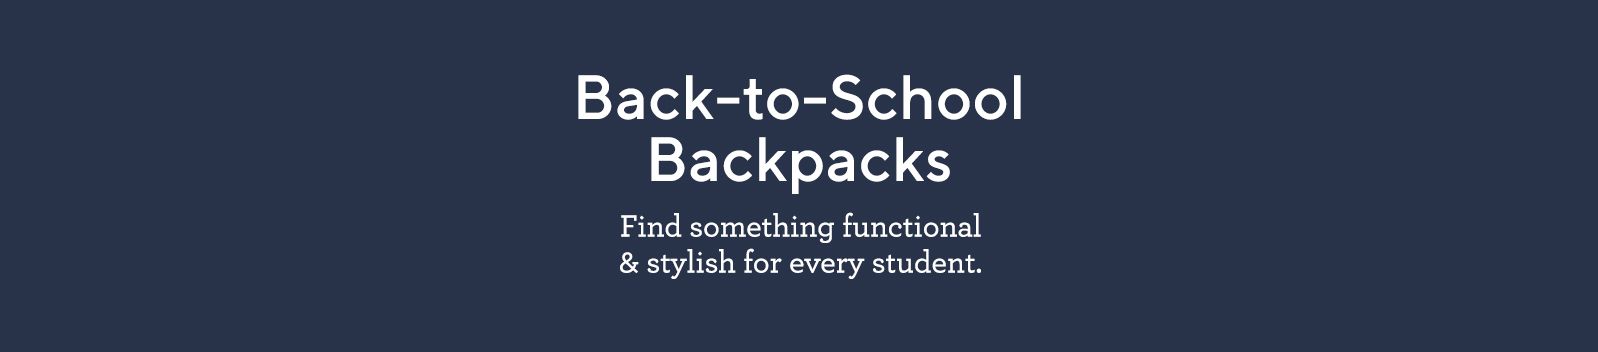 Back-to-School Backpacks.  Find something functional & stylish for every student.